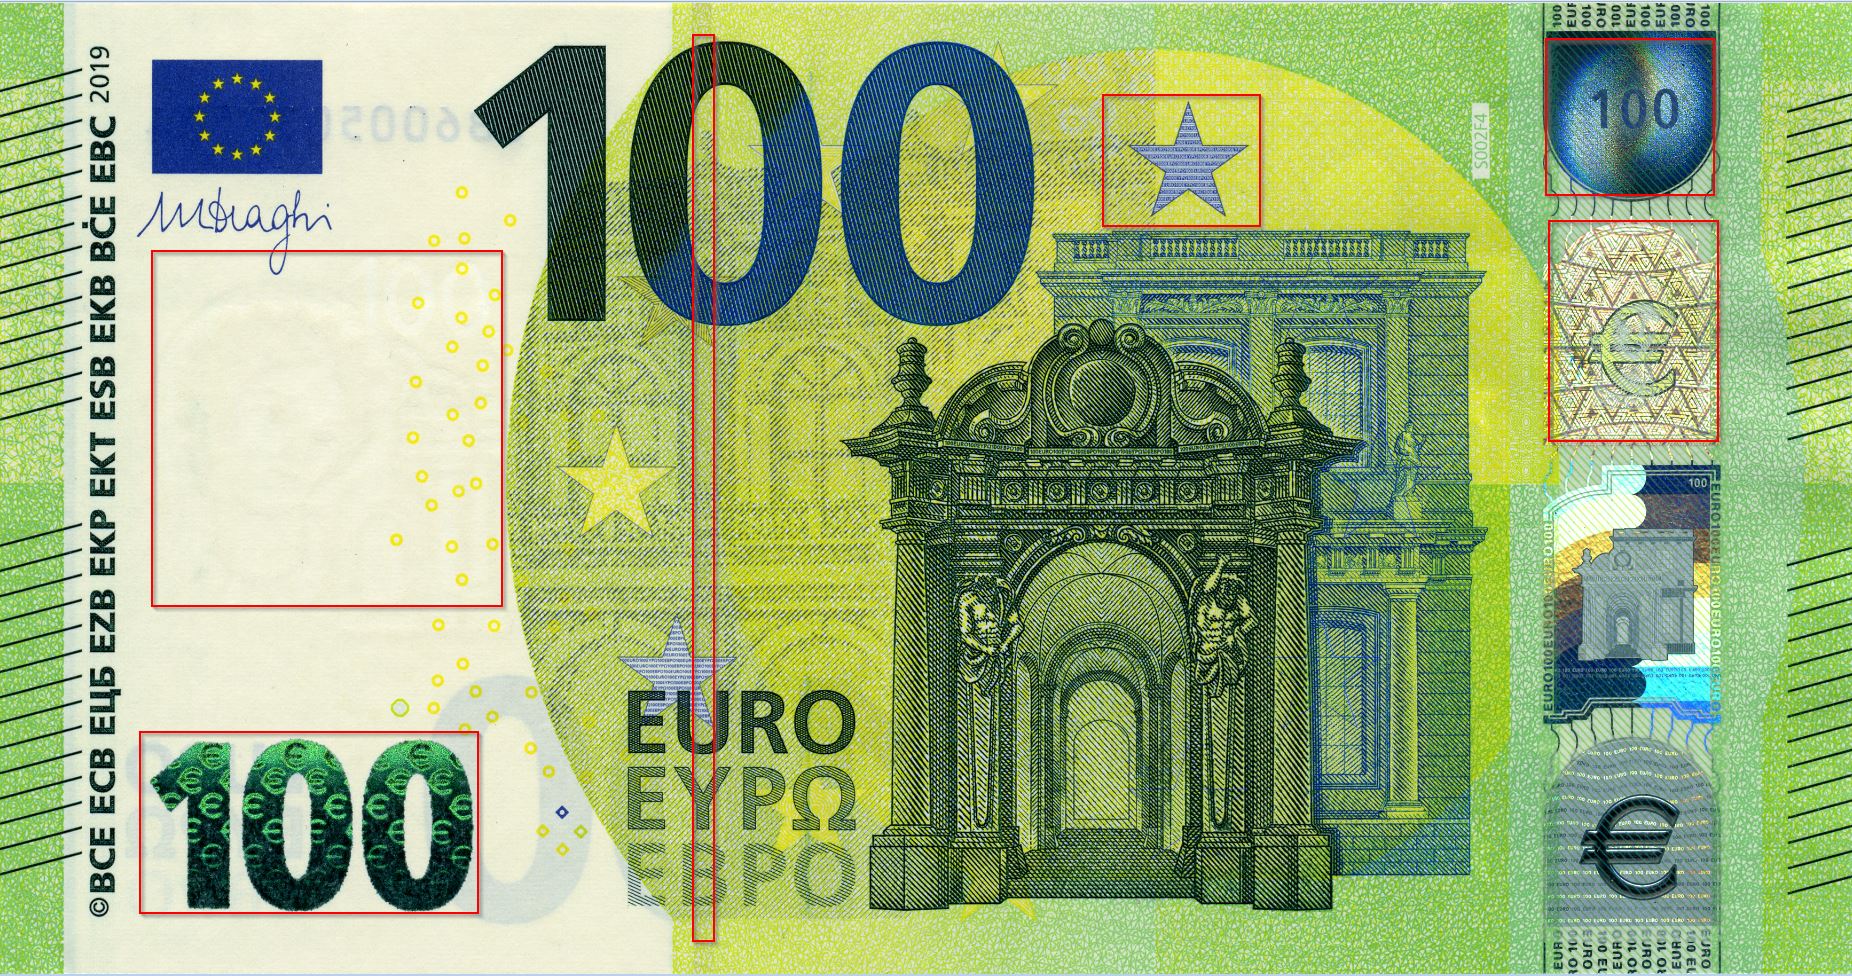 100 euro banknote Europa series - front side